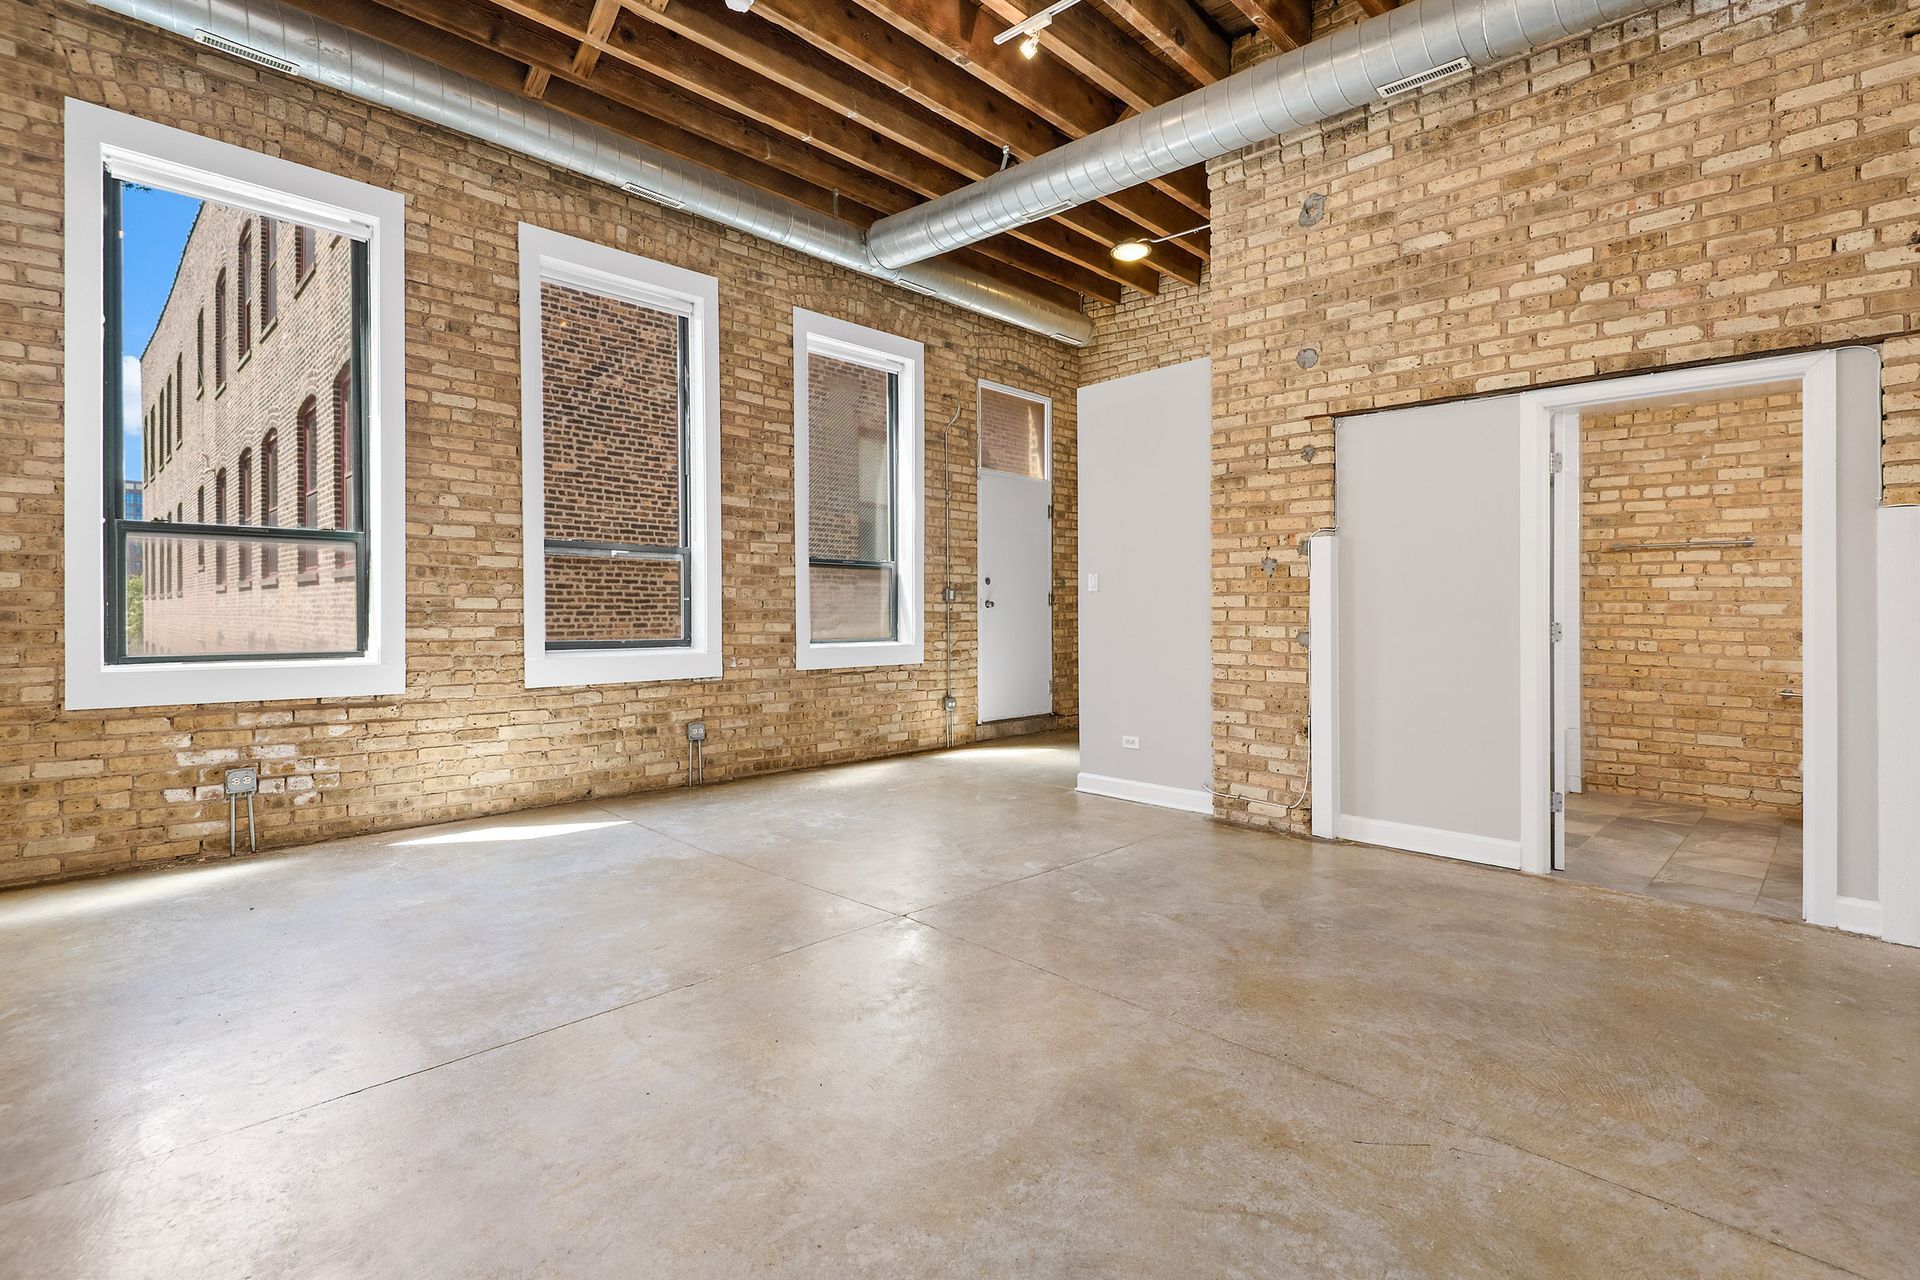 A large spacious apartment lviing room with brick walls and white doors.